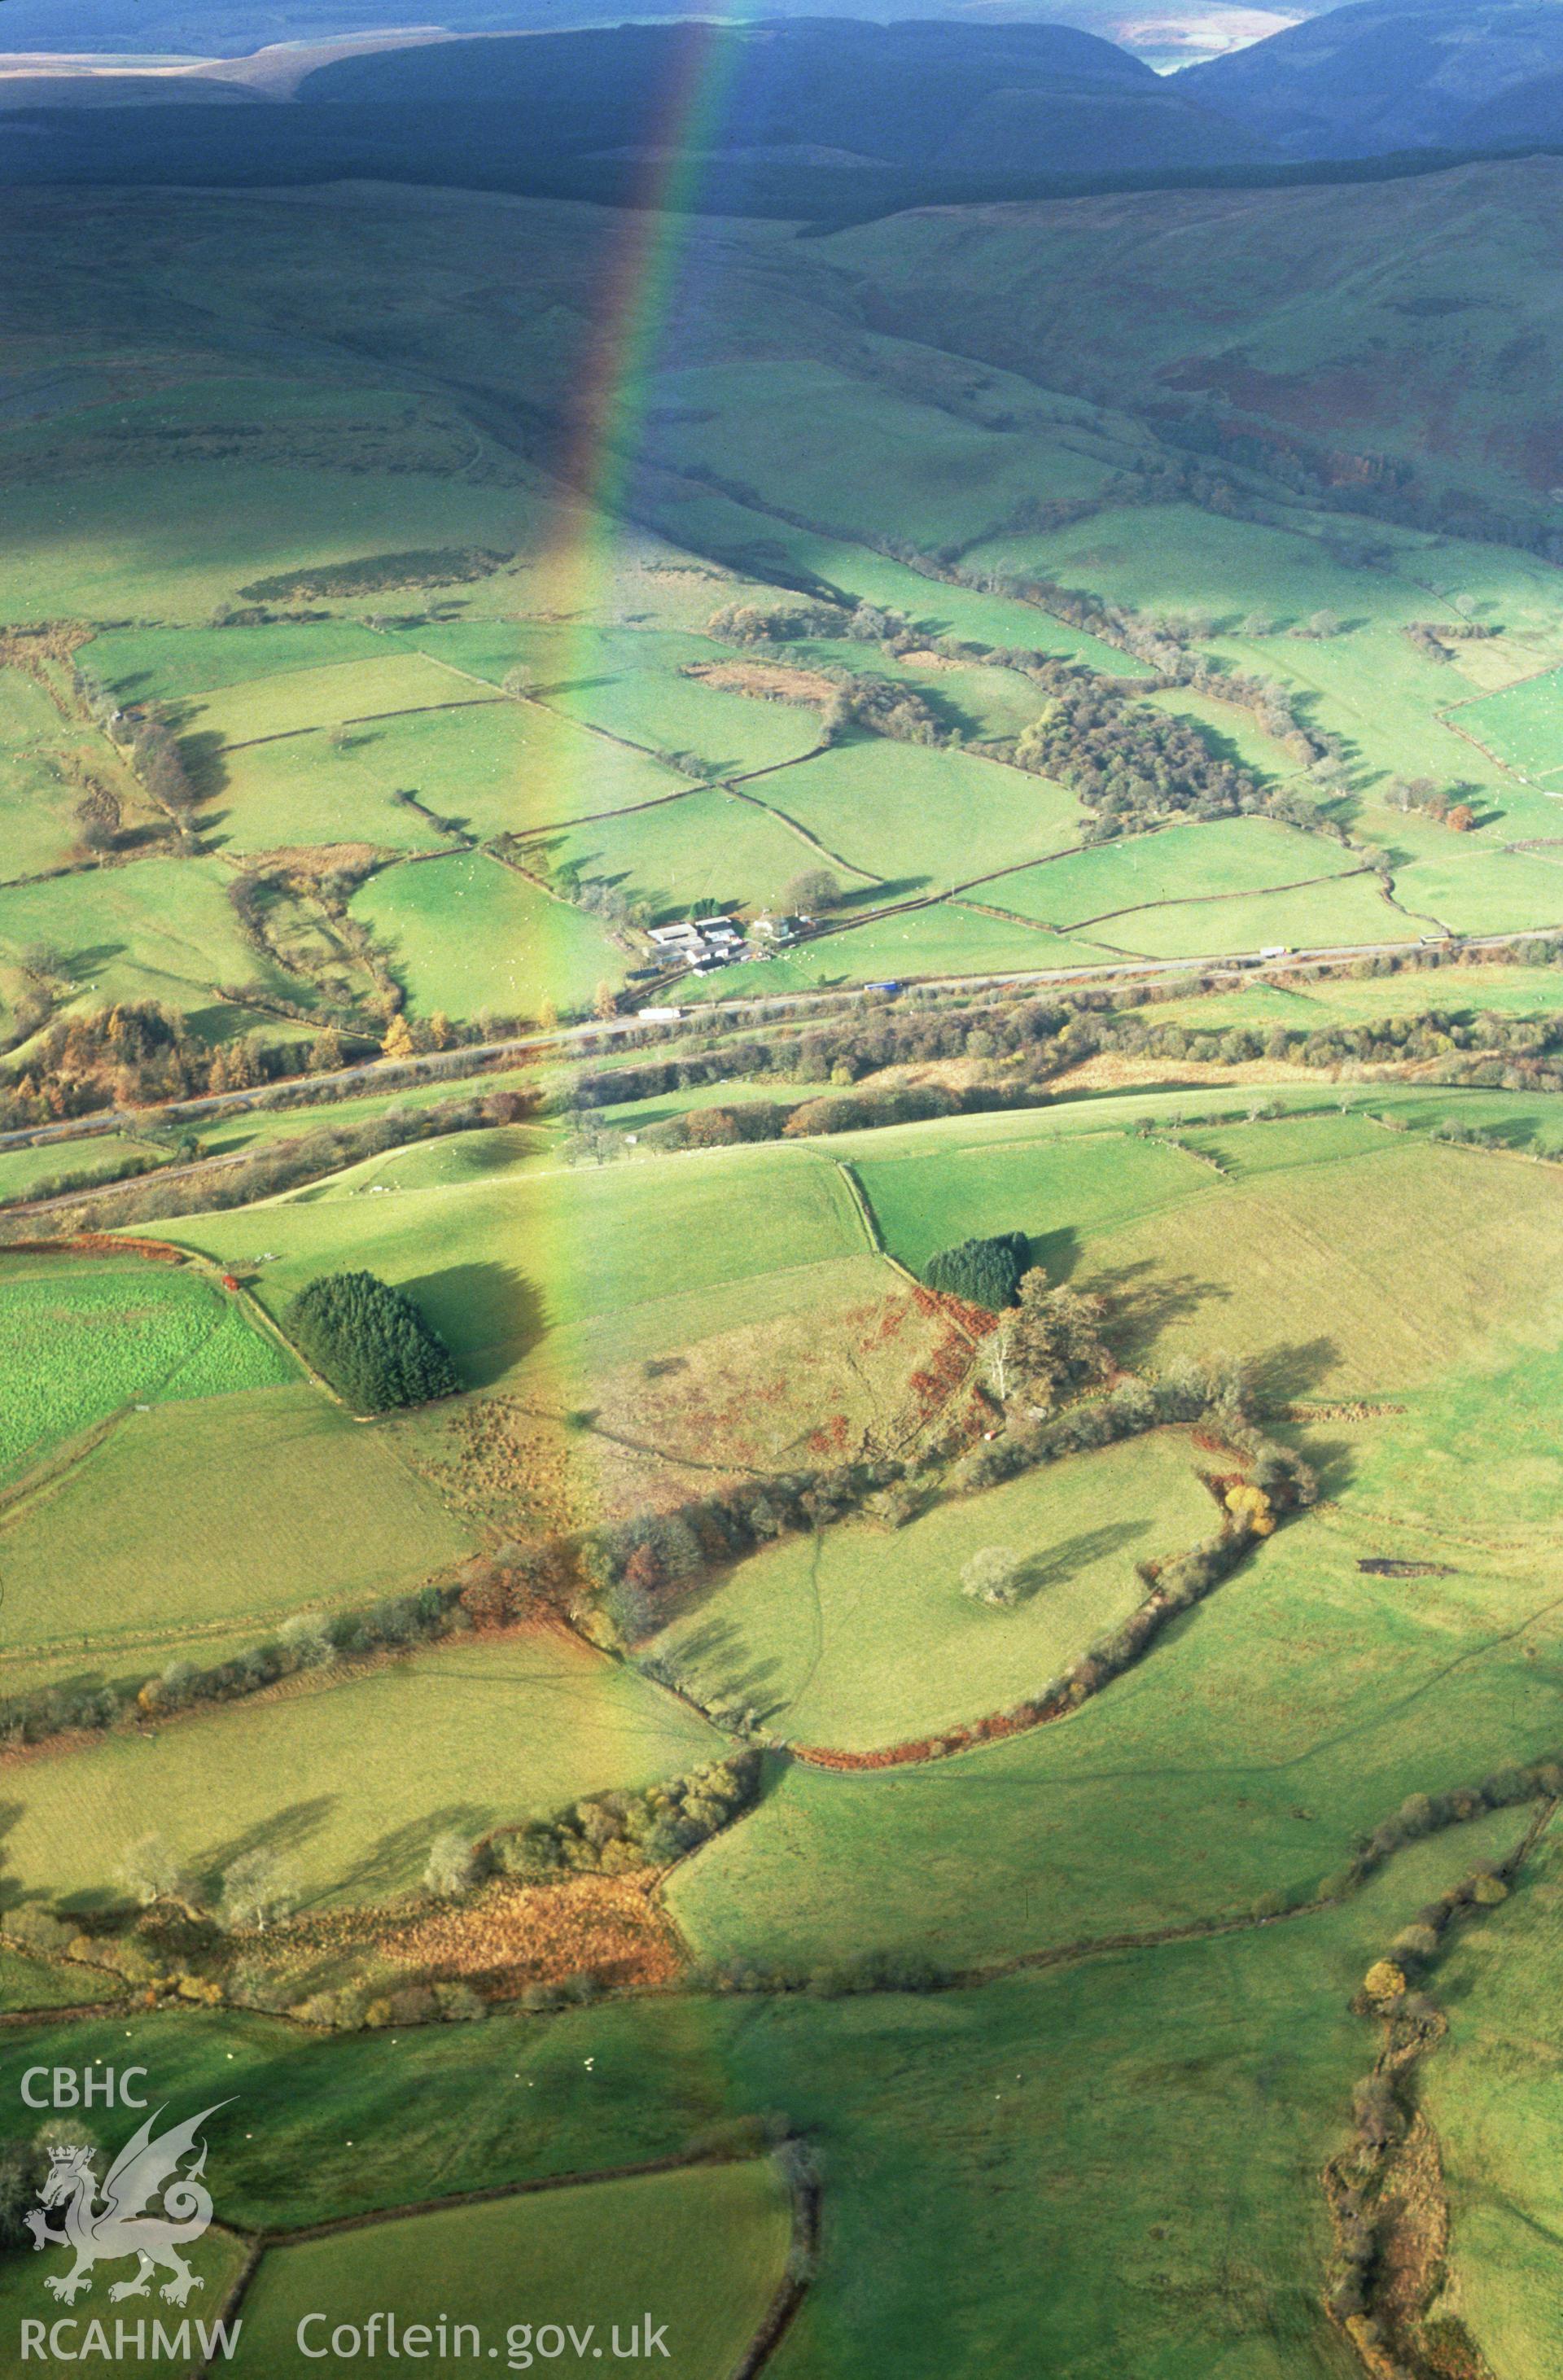 Slide of RCAHMW colour oblique aerial photograph of rainbow at Llanwrtyd Wells, taken by T.G. Driver, 2003.